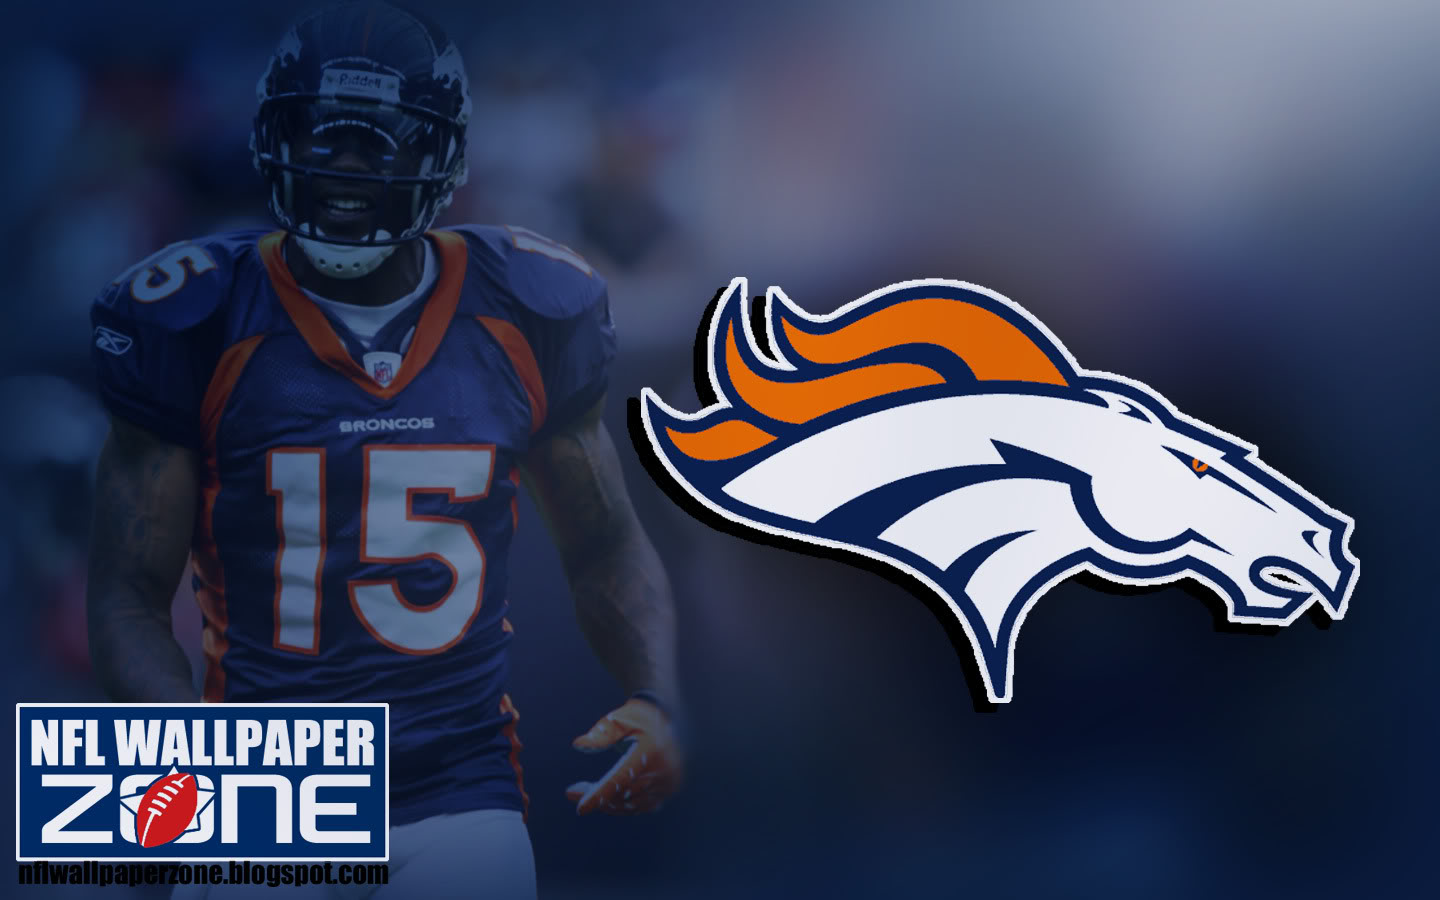 Hope You Like This Denver Broncos Wallpaper HD Background As Much